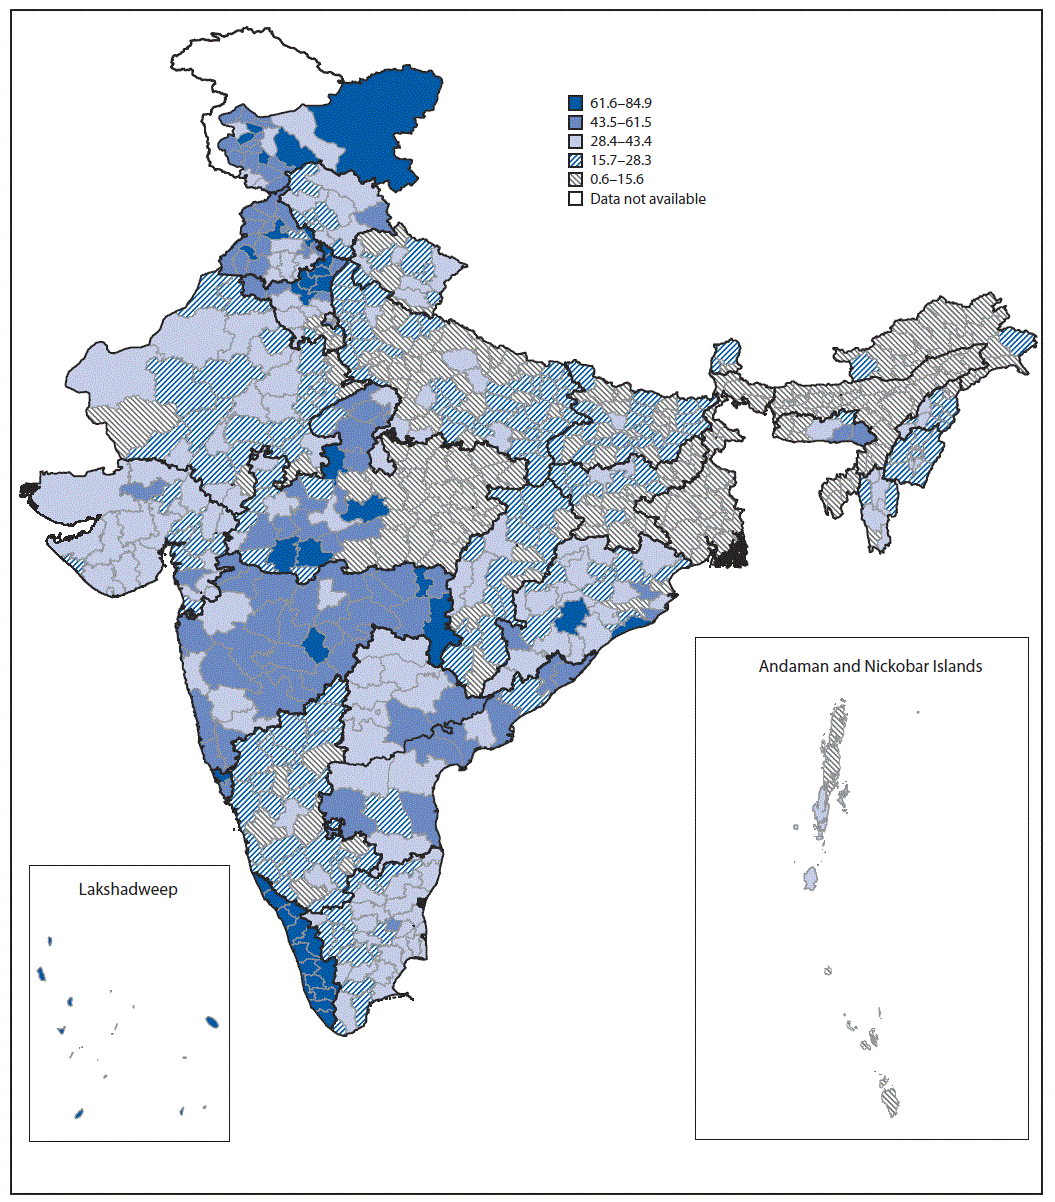 The figure is a map showing the prevalence of cervical cancer screening among women aged 30–49 years, by district in India during 2015–2016, according to the National Family Health Survey-4.